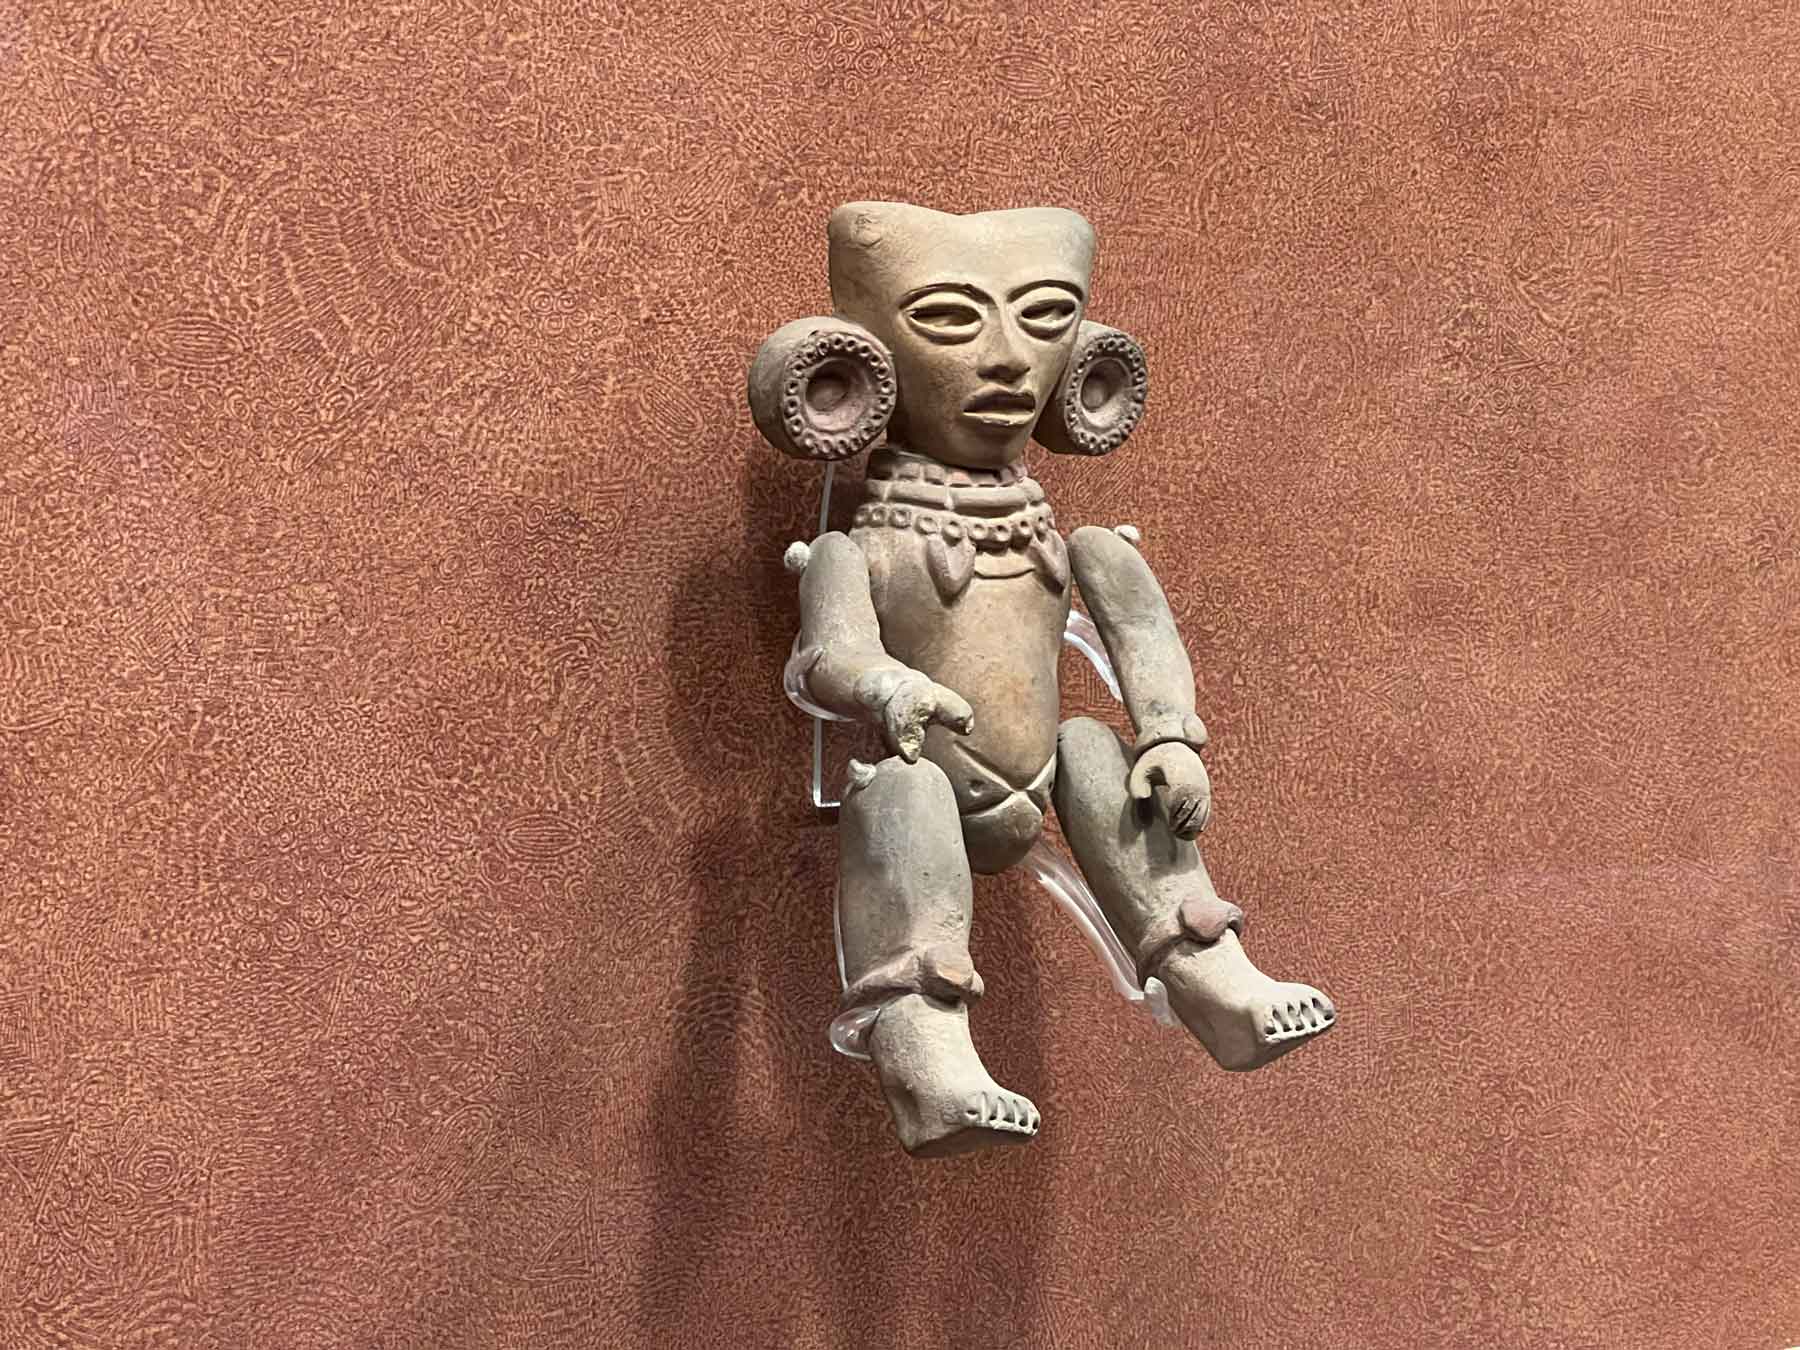 A small figurine with articulated joints from Teotihuacan